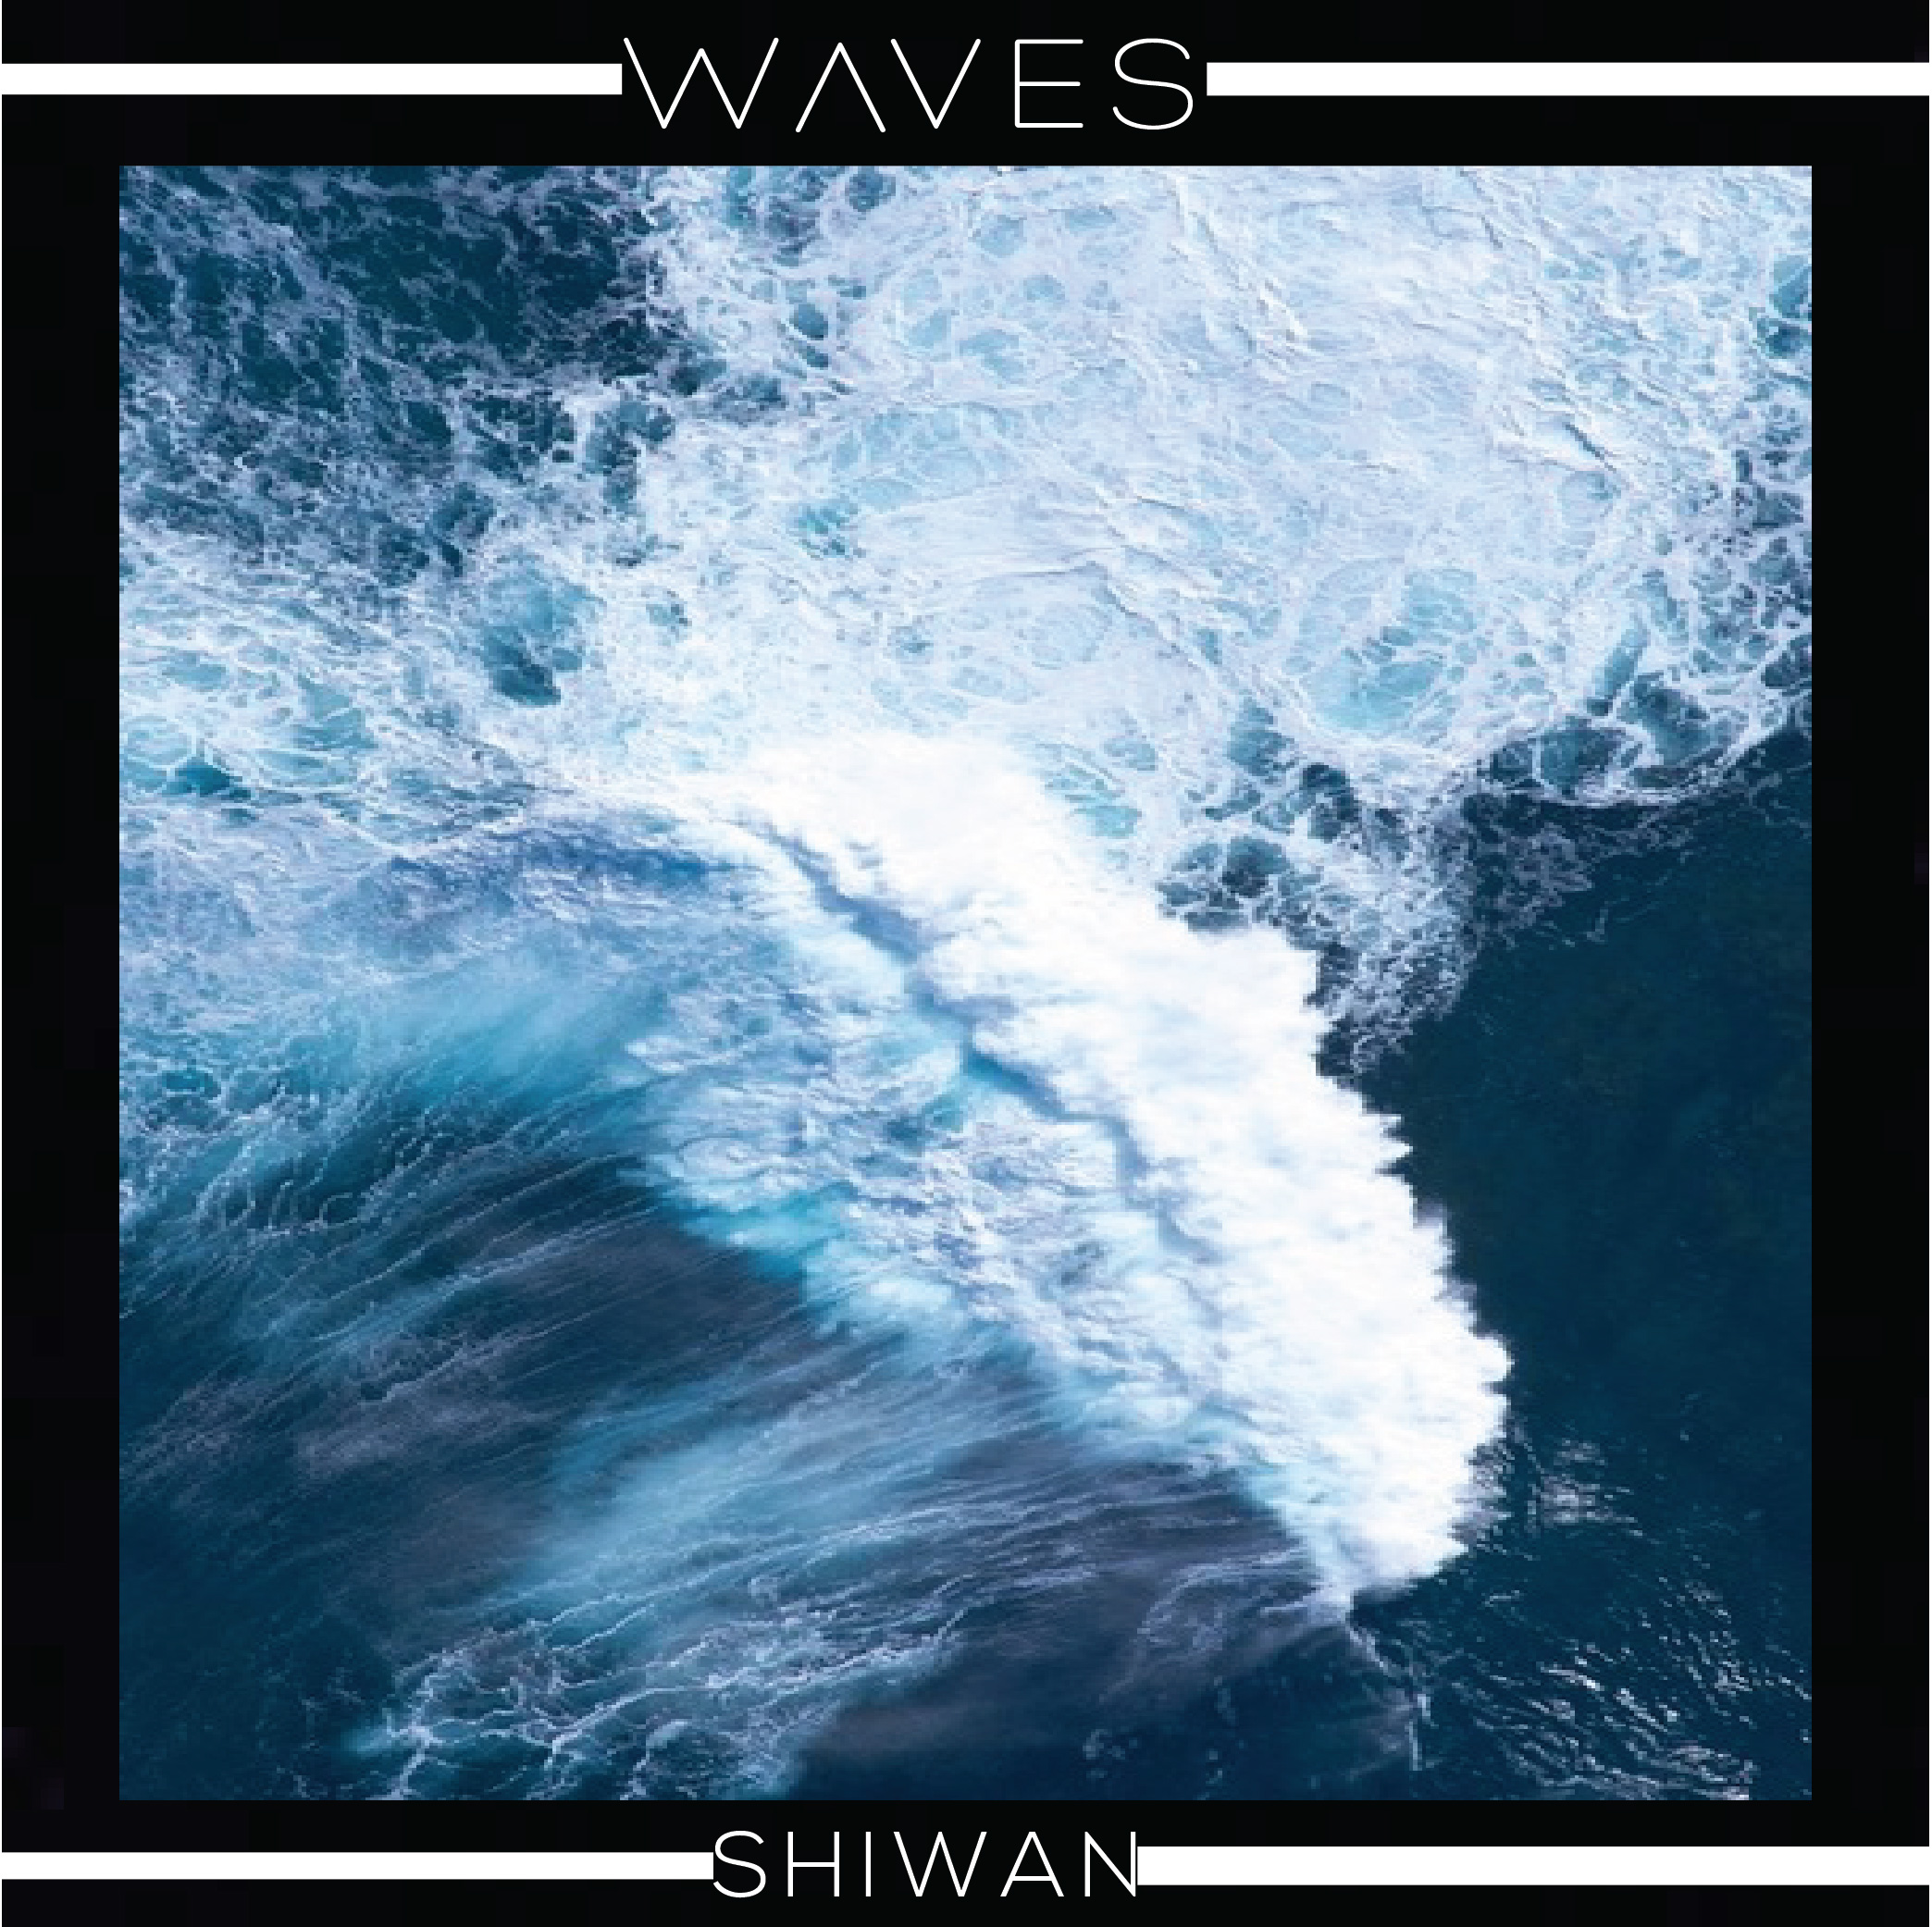 Shiwan: Waves (The Prequel)